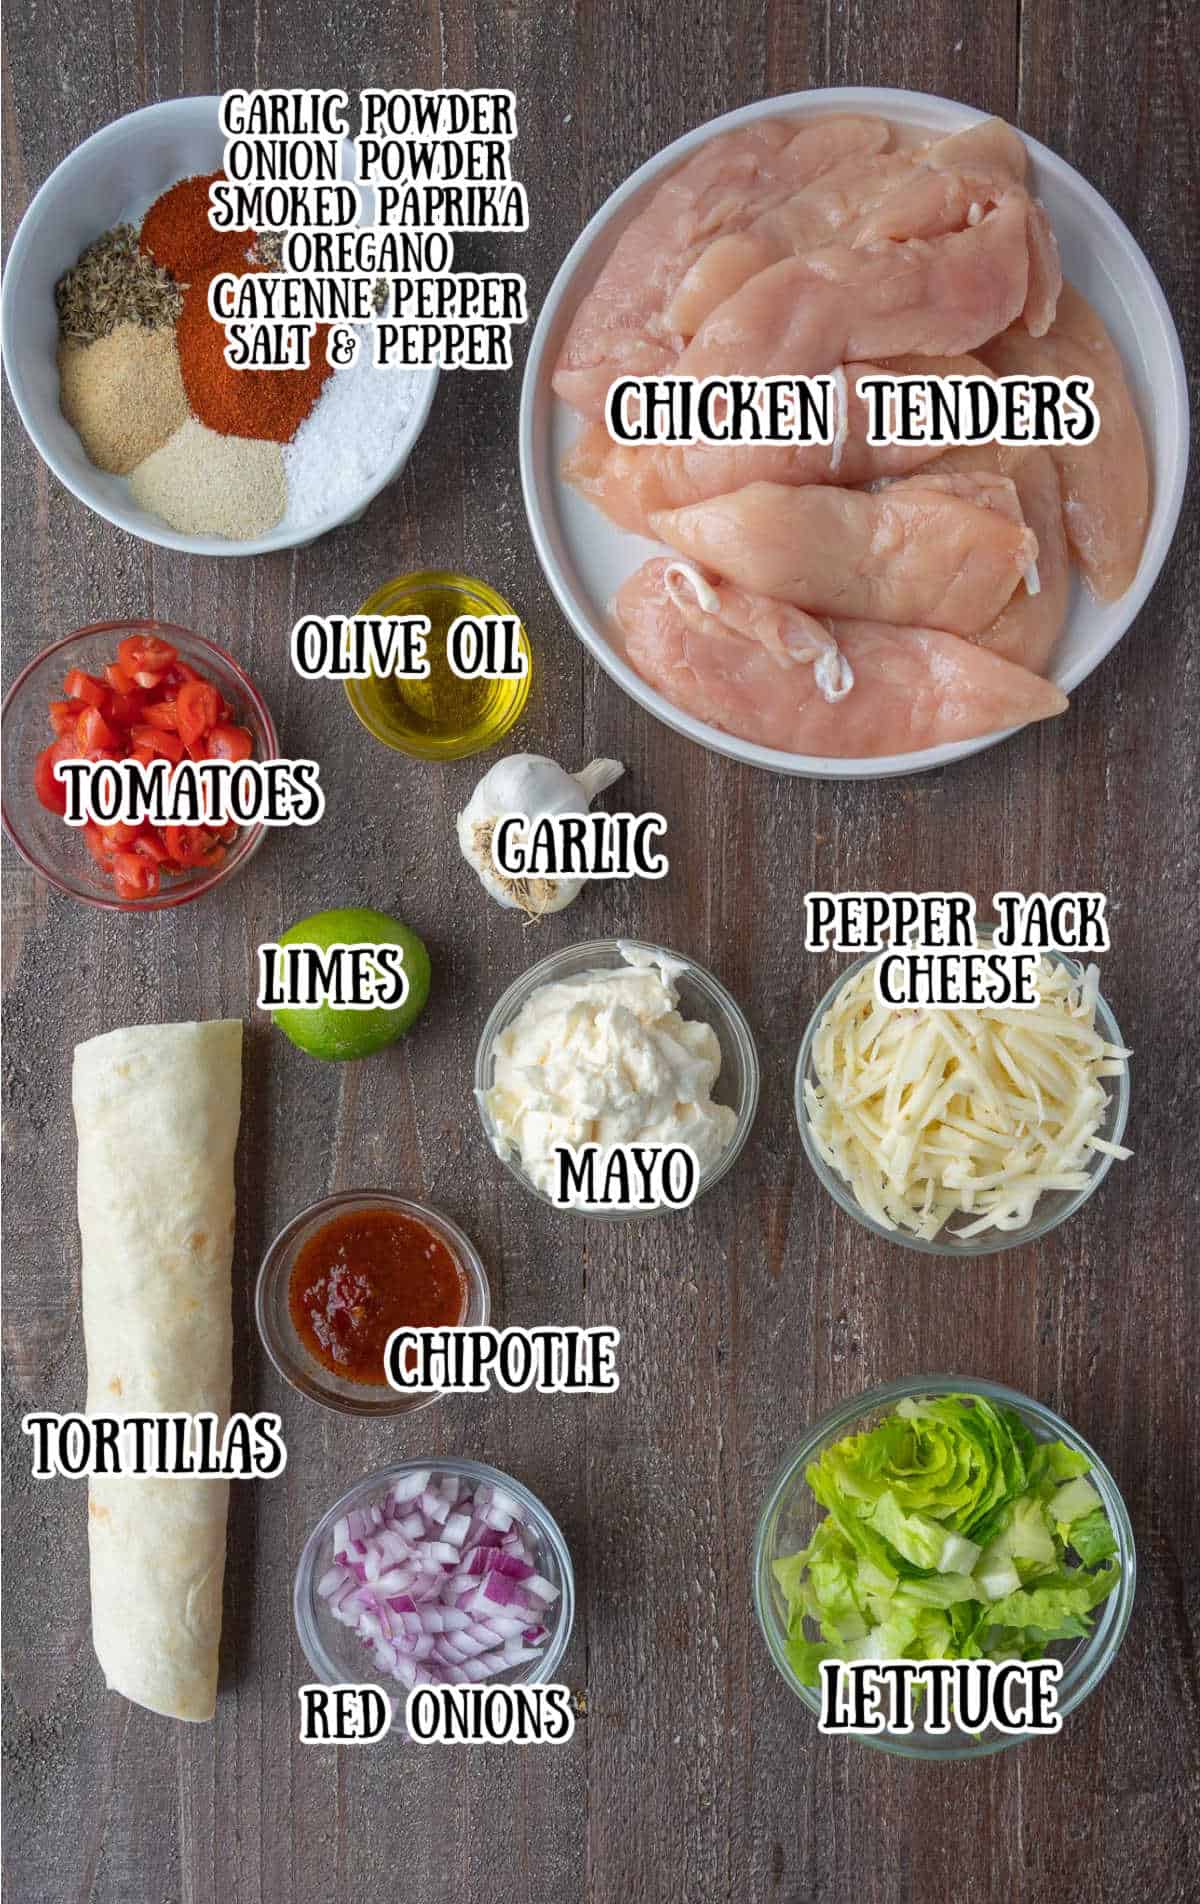 All the ingredients needed for this recipe.